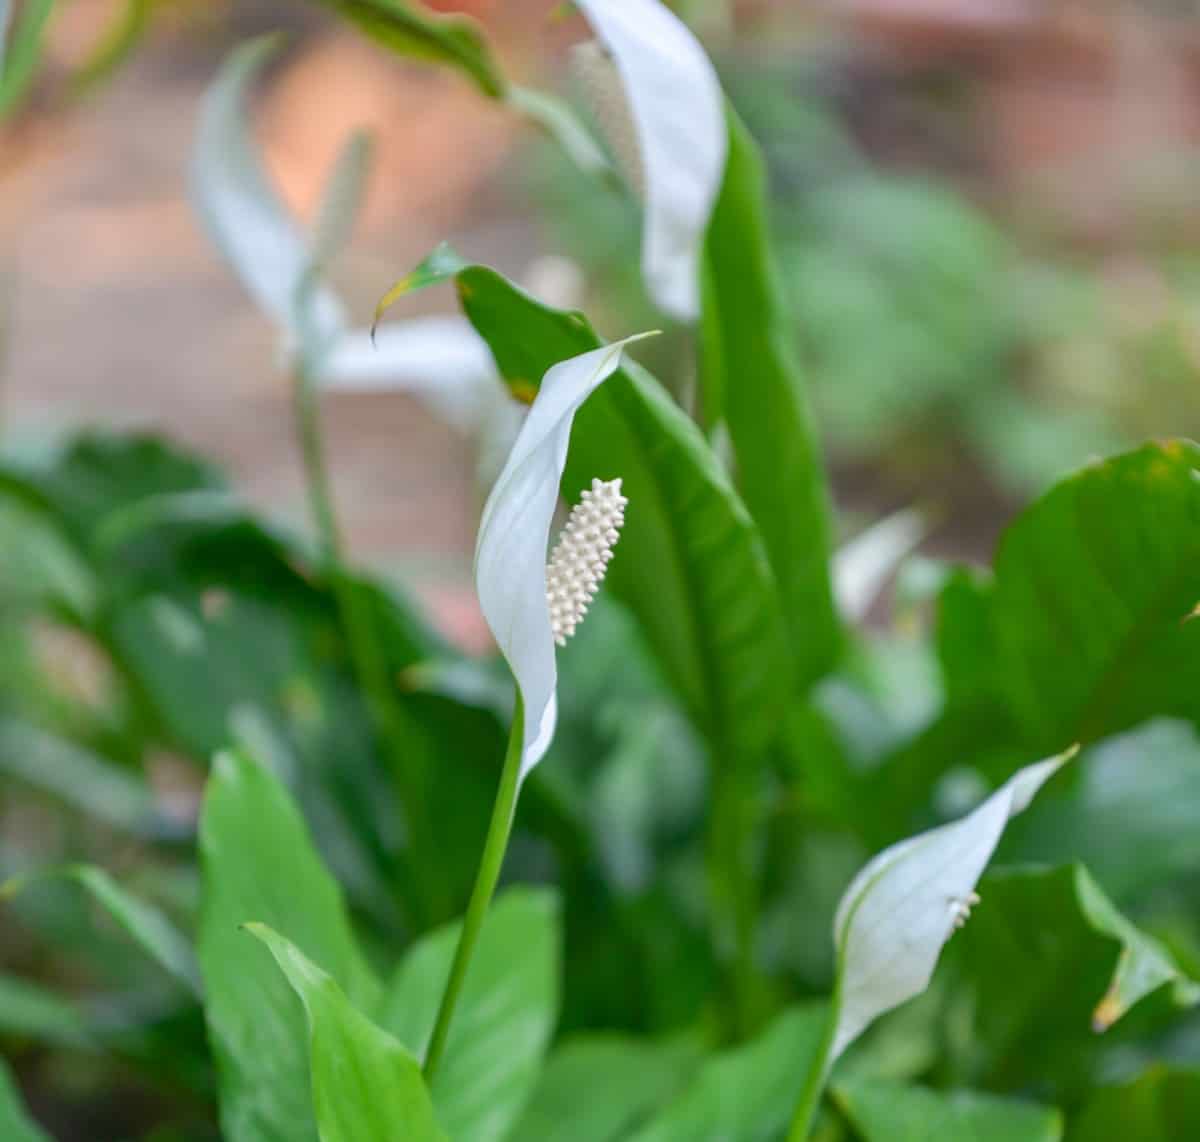 the peace lily is a classic indoor air-purifying plant